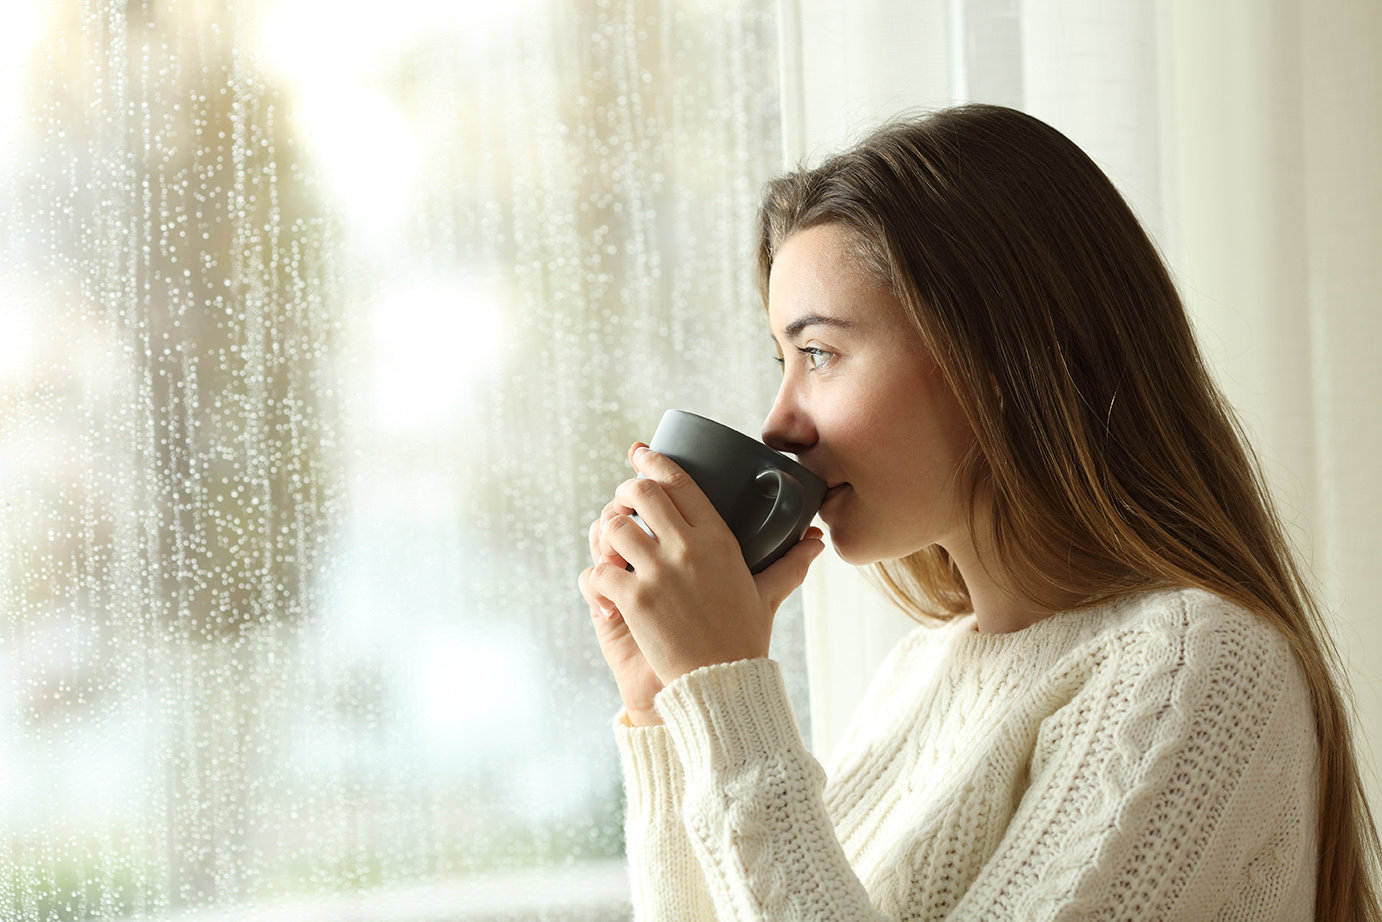 Teen drinking coffee looking through a window a rainy day